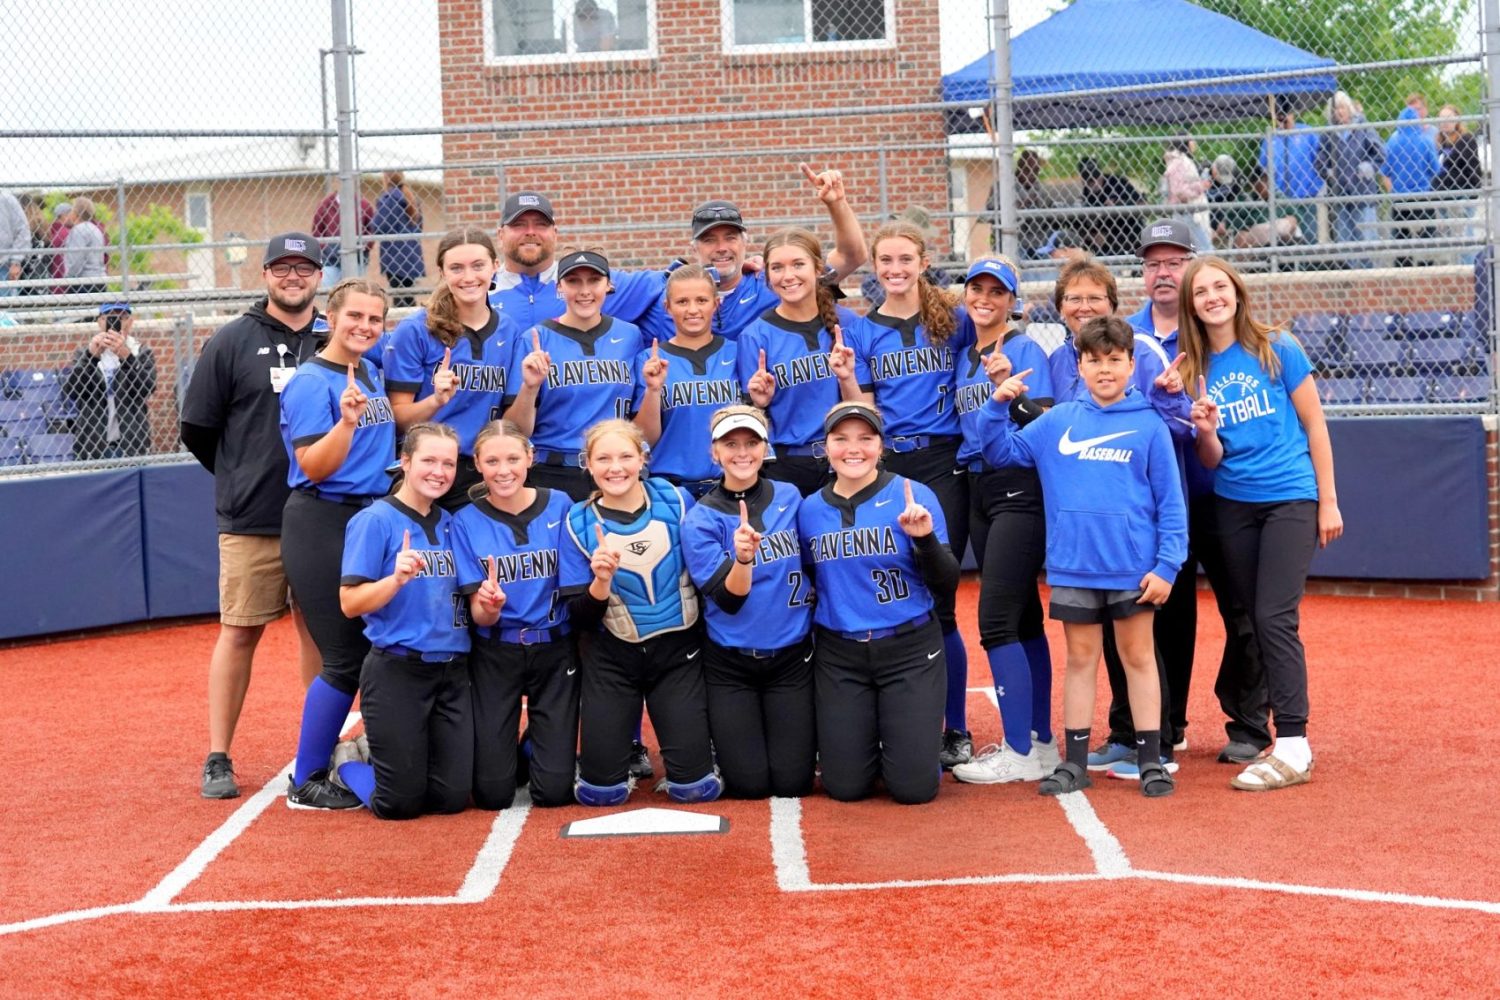 Seven-run inning propels Ravenna into the Division 3 softball state semifinals